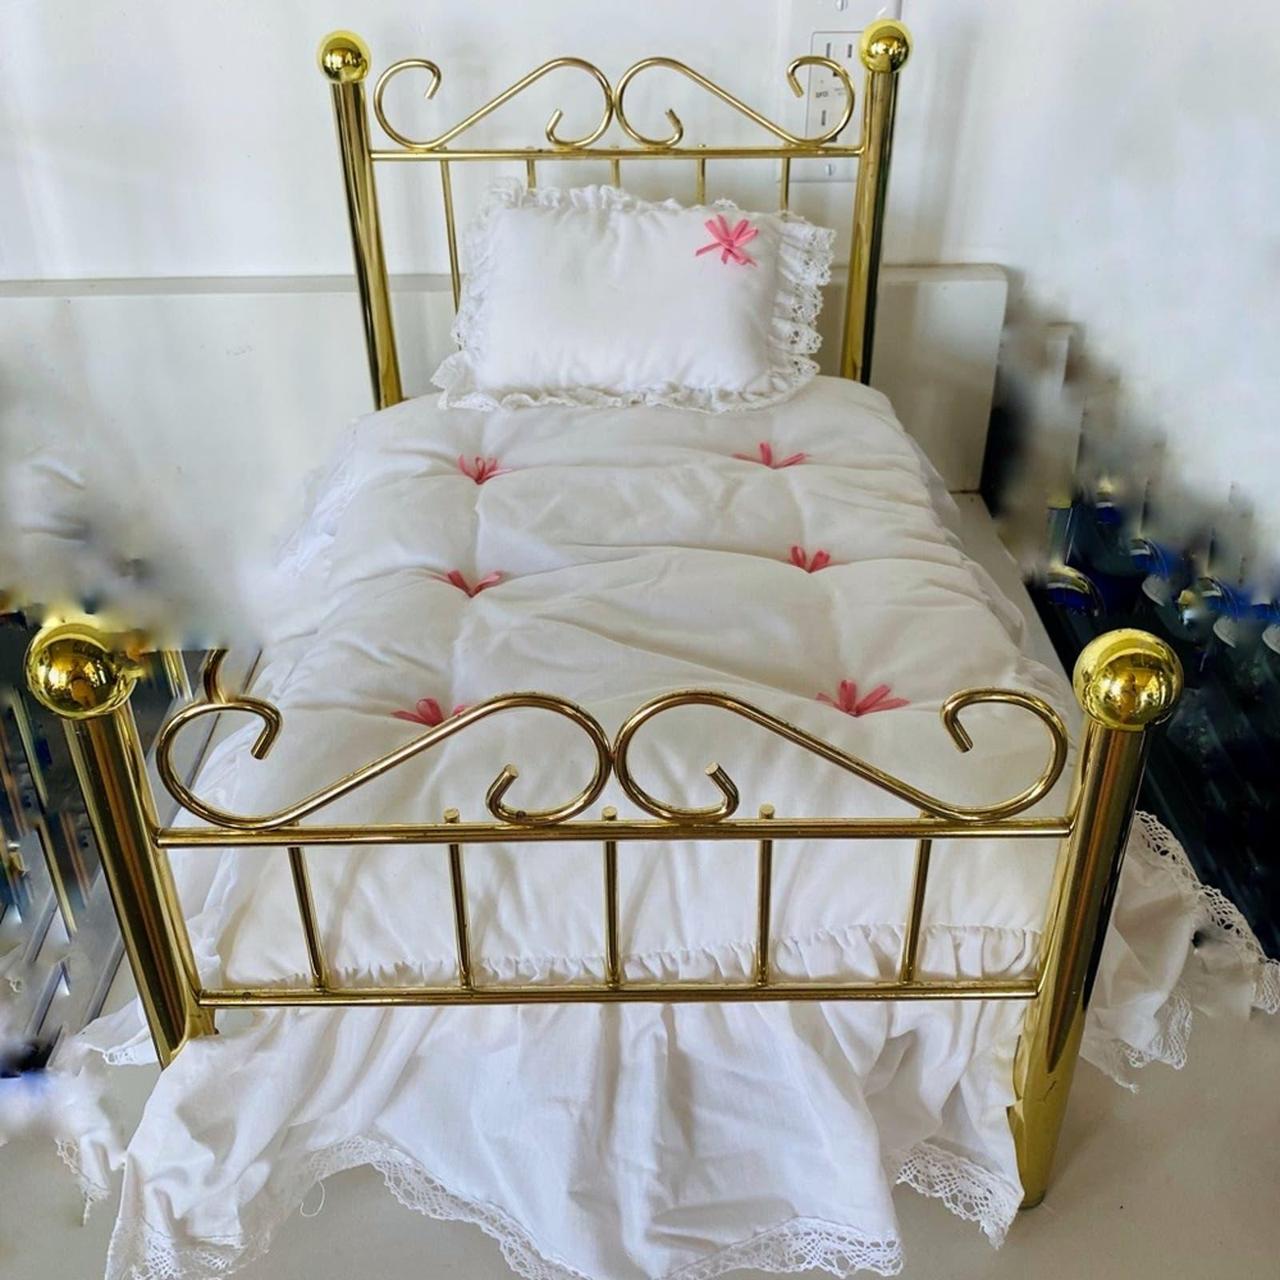 RETIRED Samantha's Brass Bed w Bedding extras for 18 American